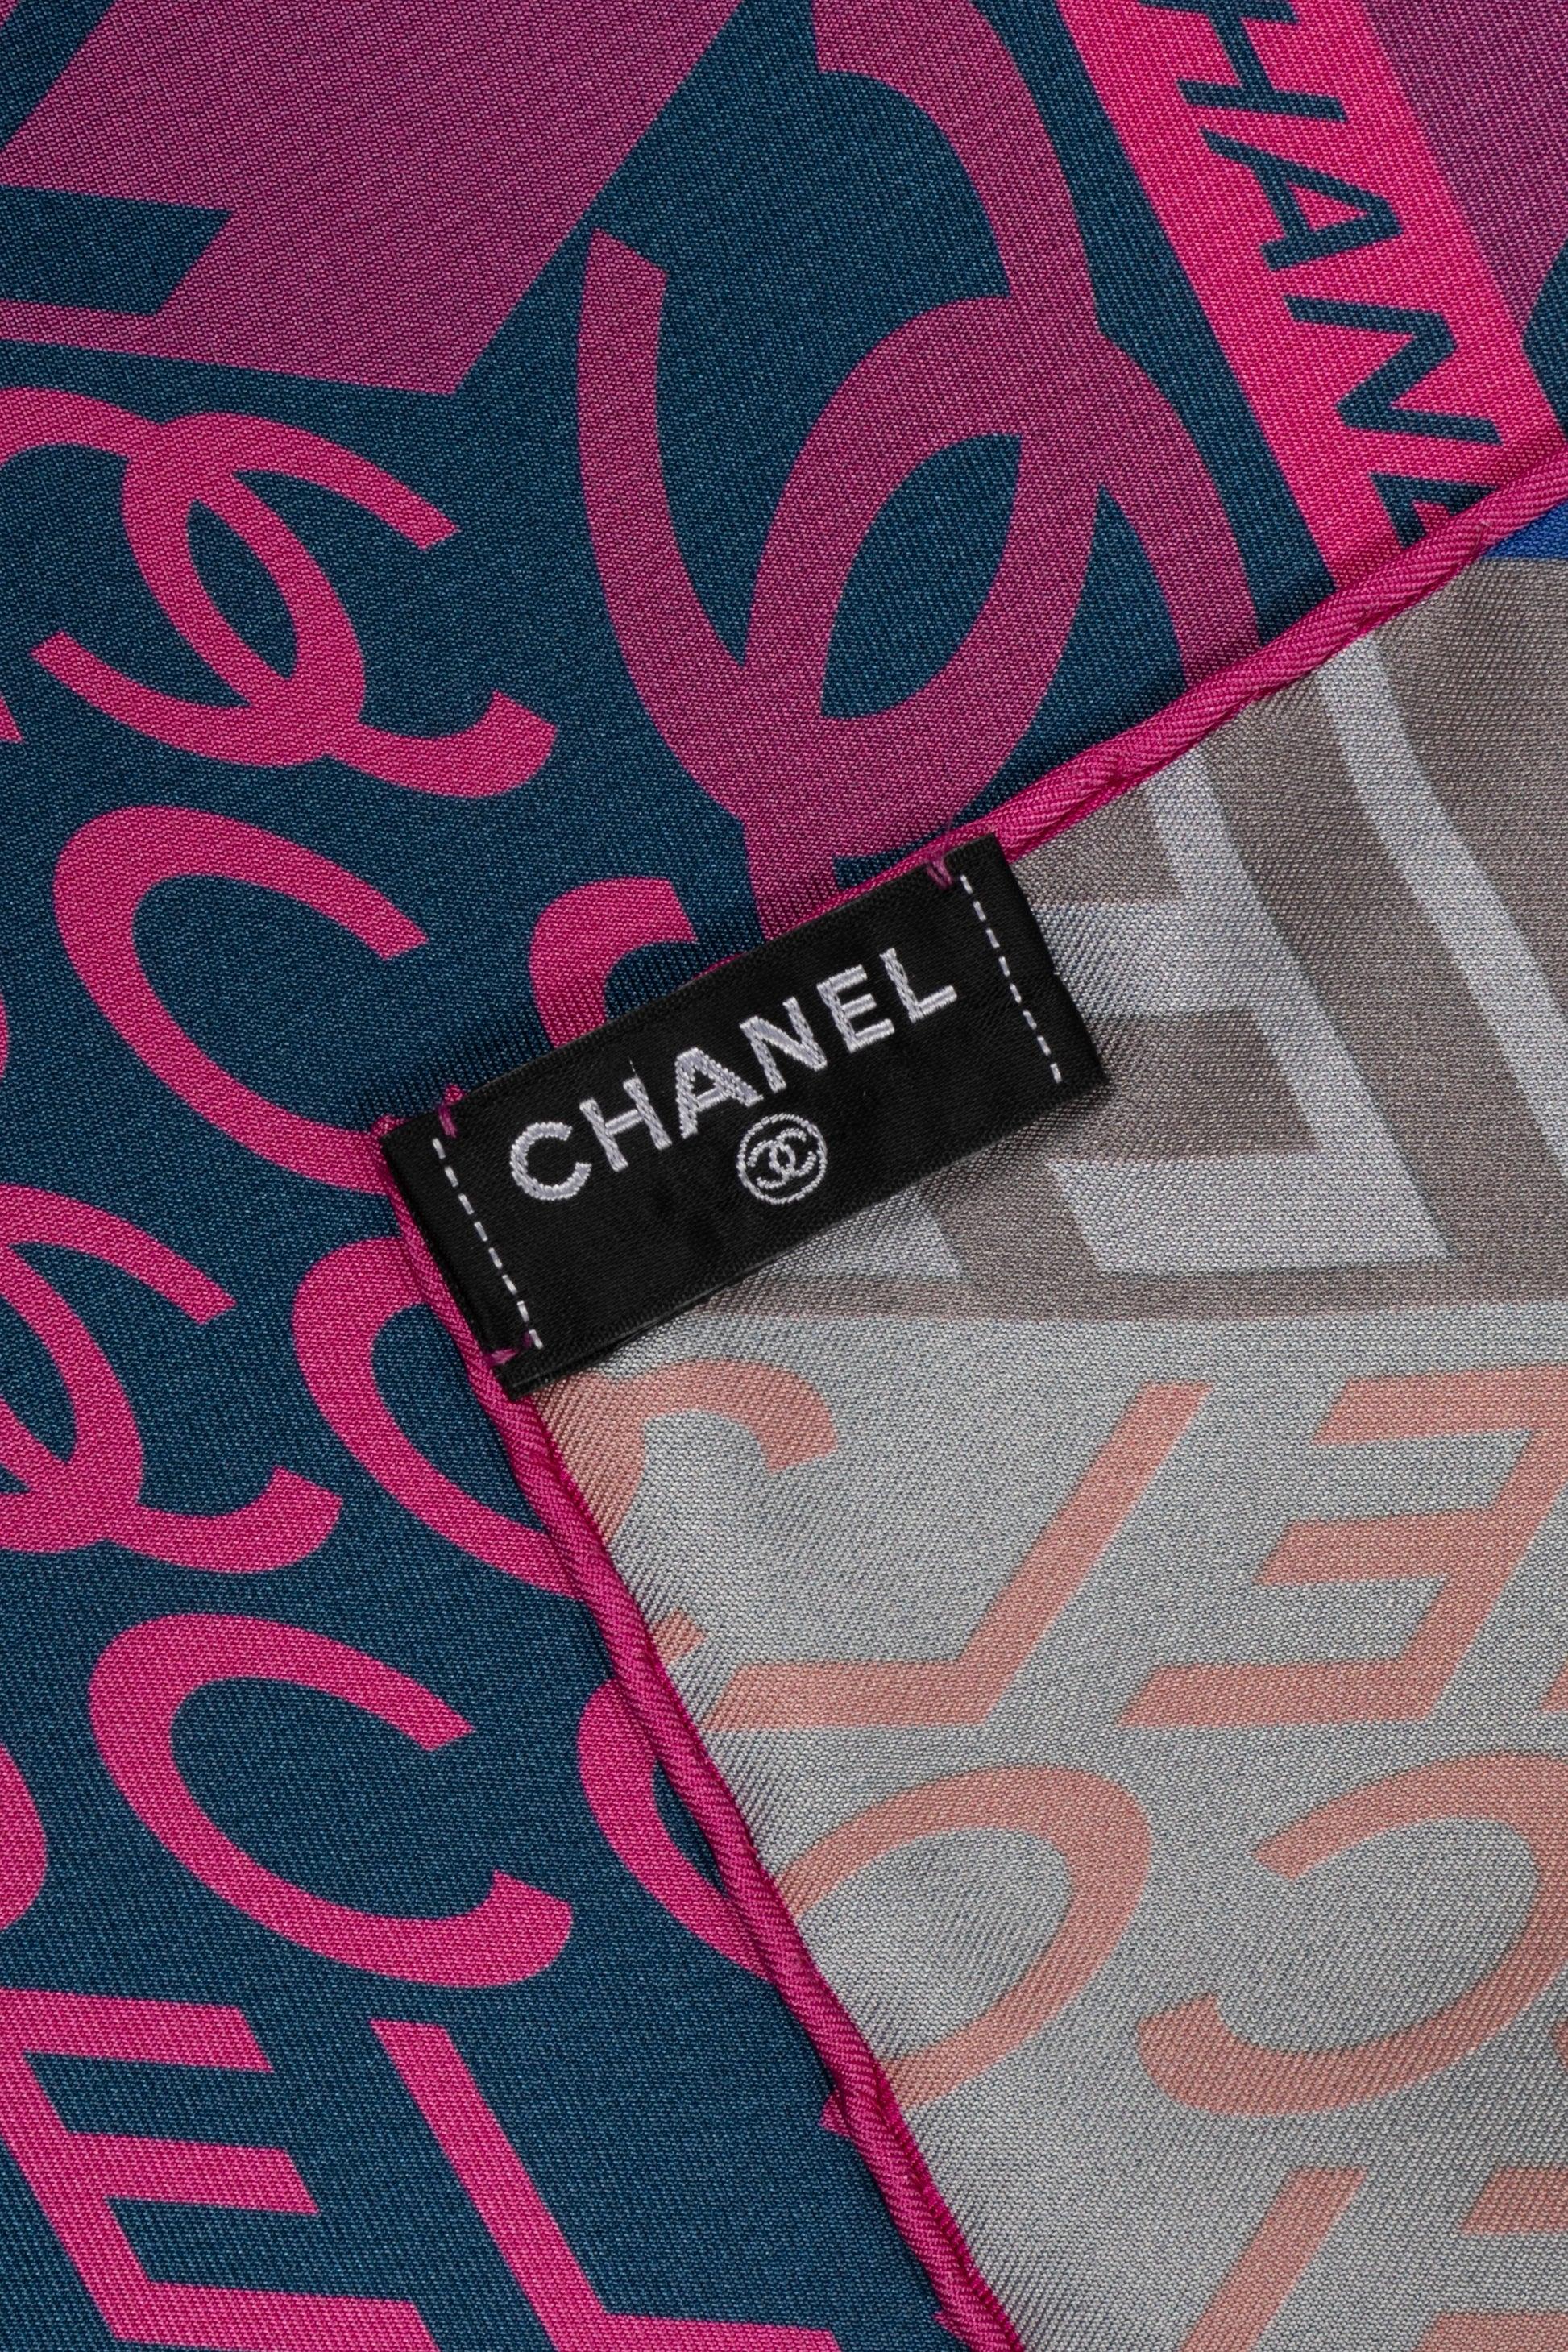 Chanel Silk Reversible Foulard in Navy Blue and Pink Tones For Sale 1